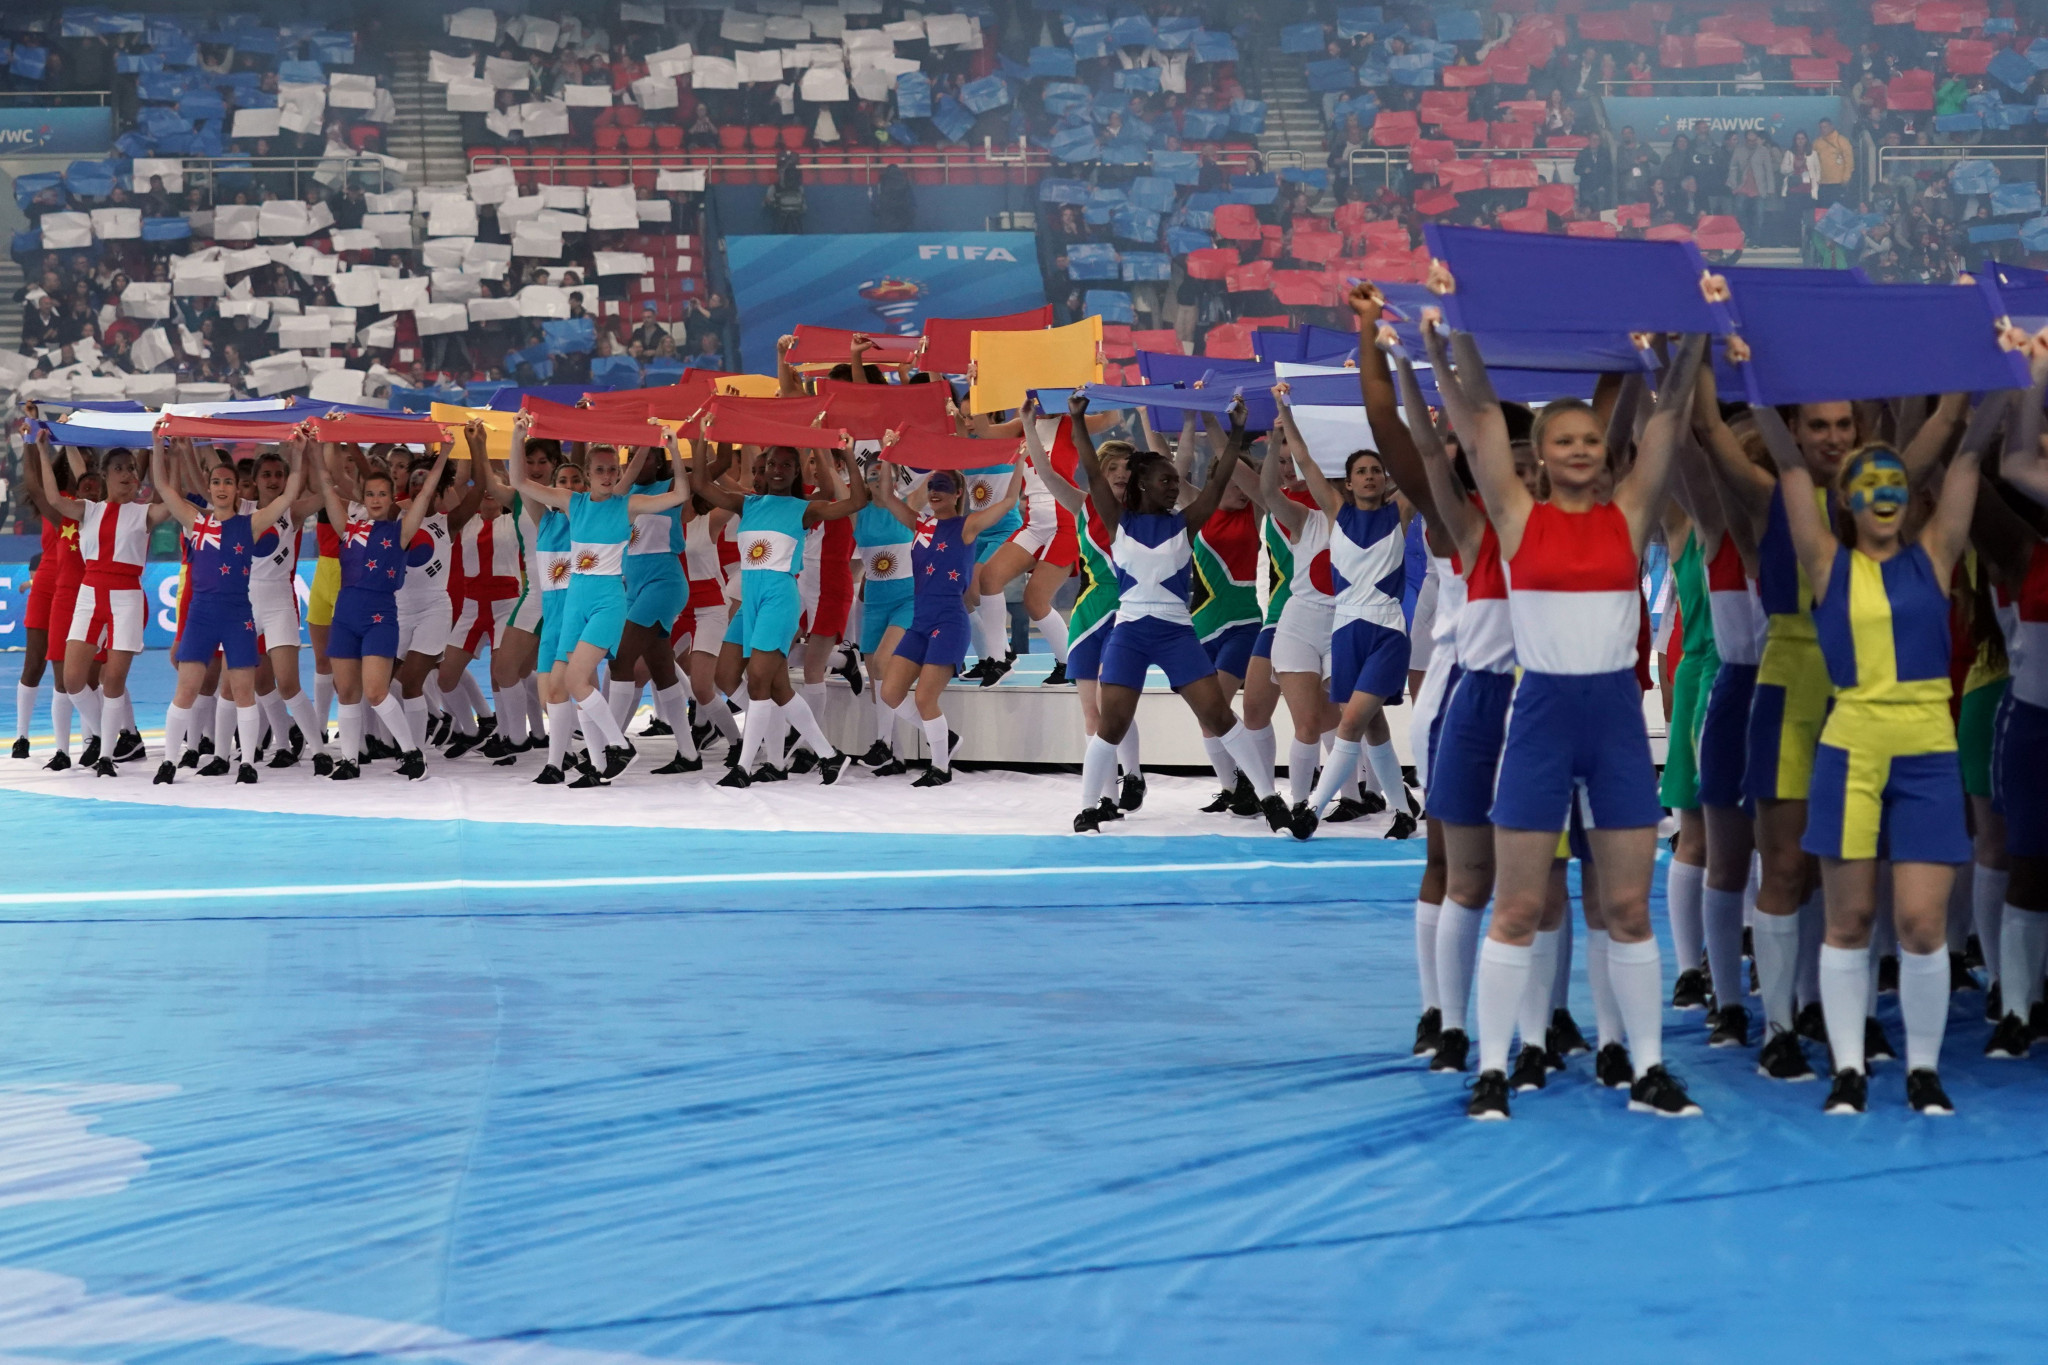 As the first match of the 2019 FIFA Women's World Cup, a brief Opening Ceremony took place before the game begun ©Getty Images